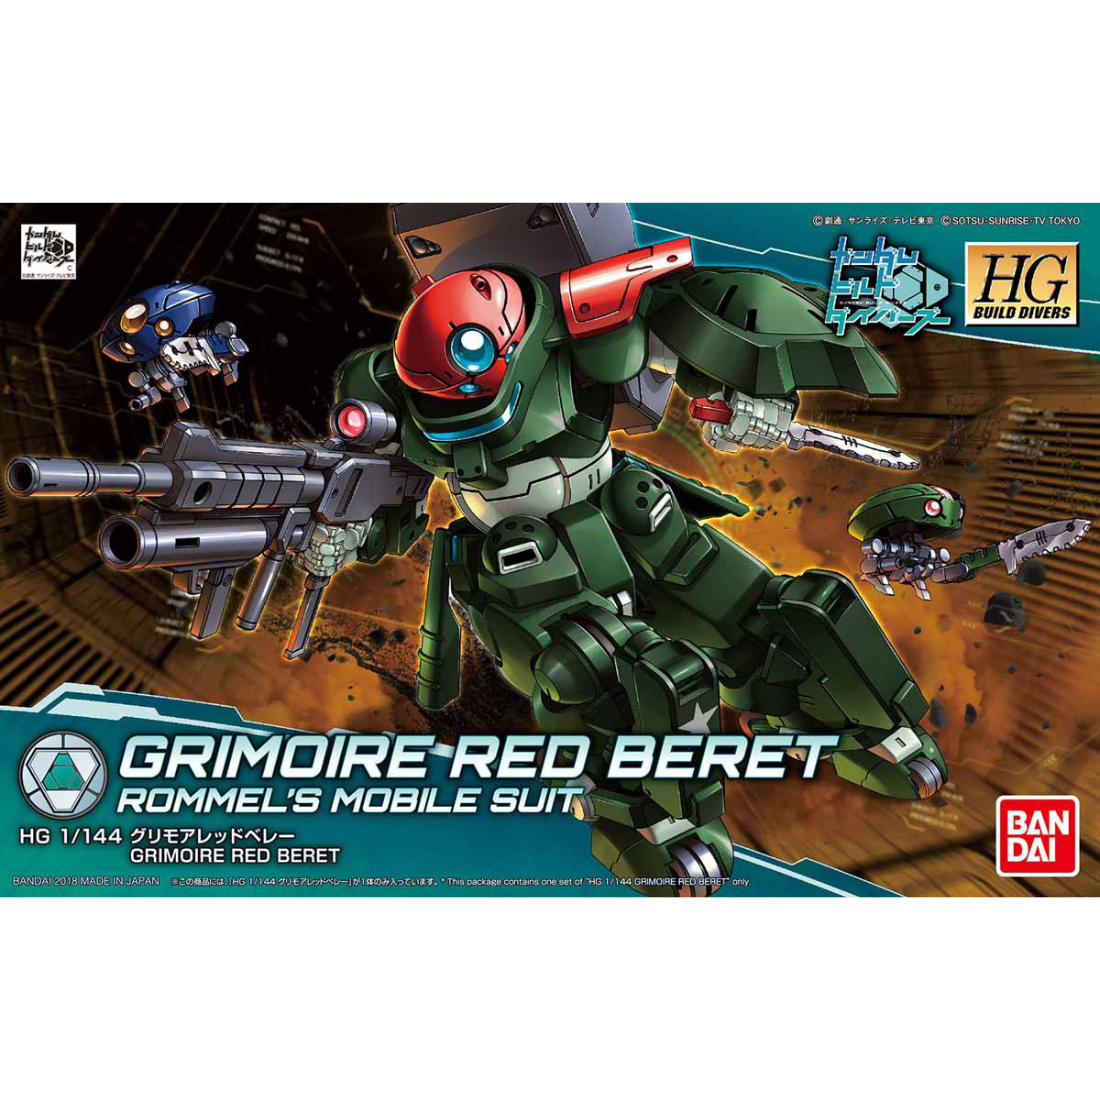 HGBD 1/144 Grimoire Red Beret #5066140 by Bandai